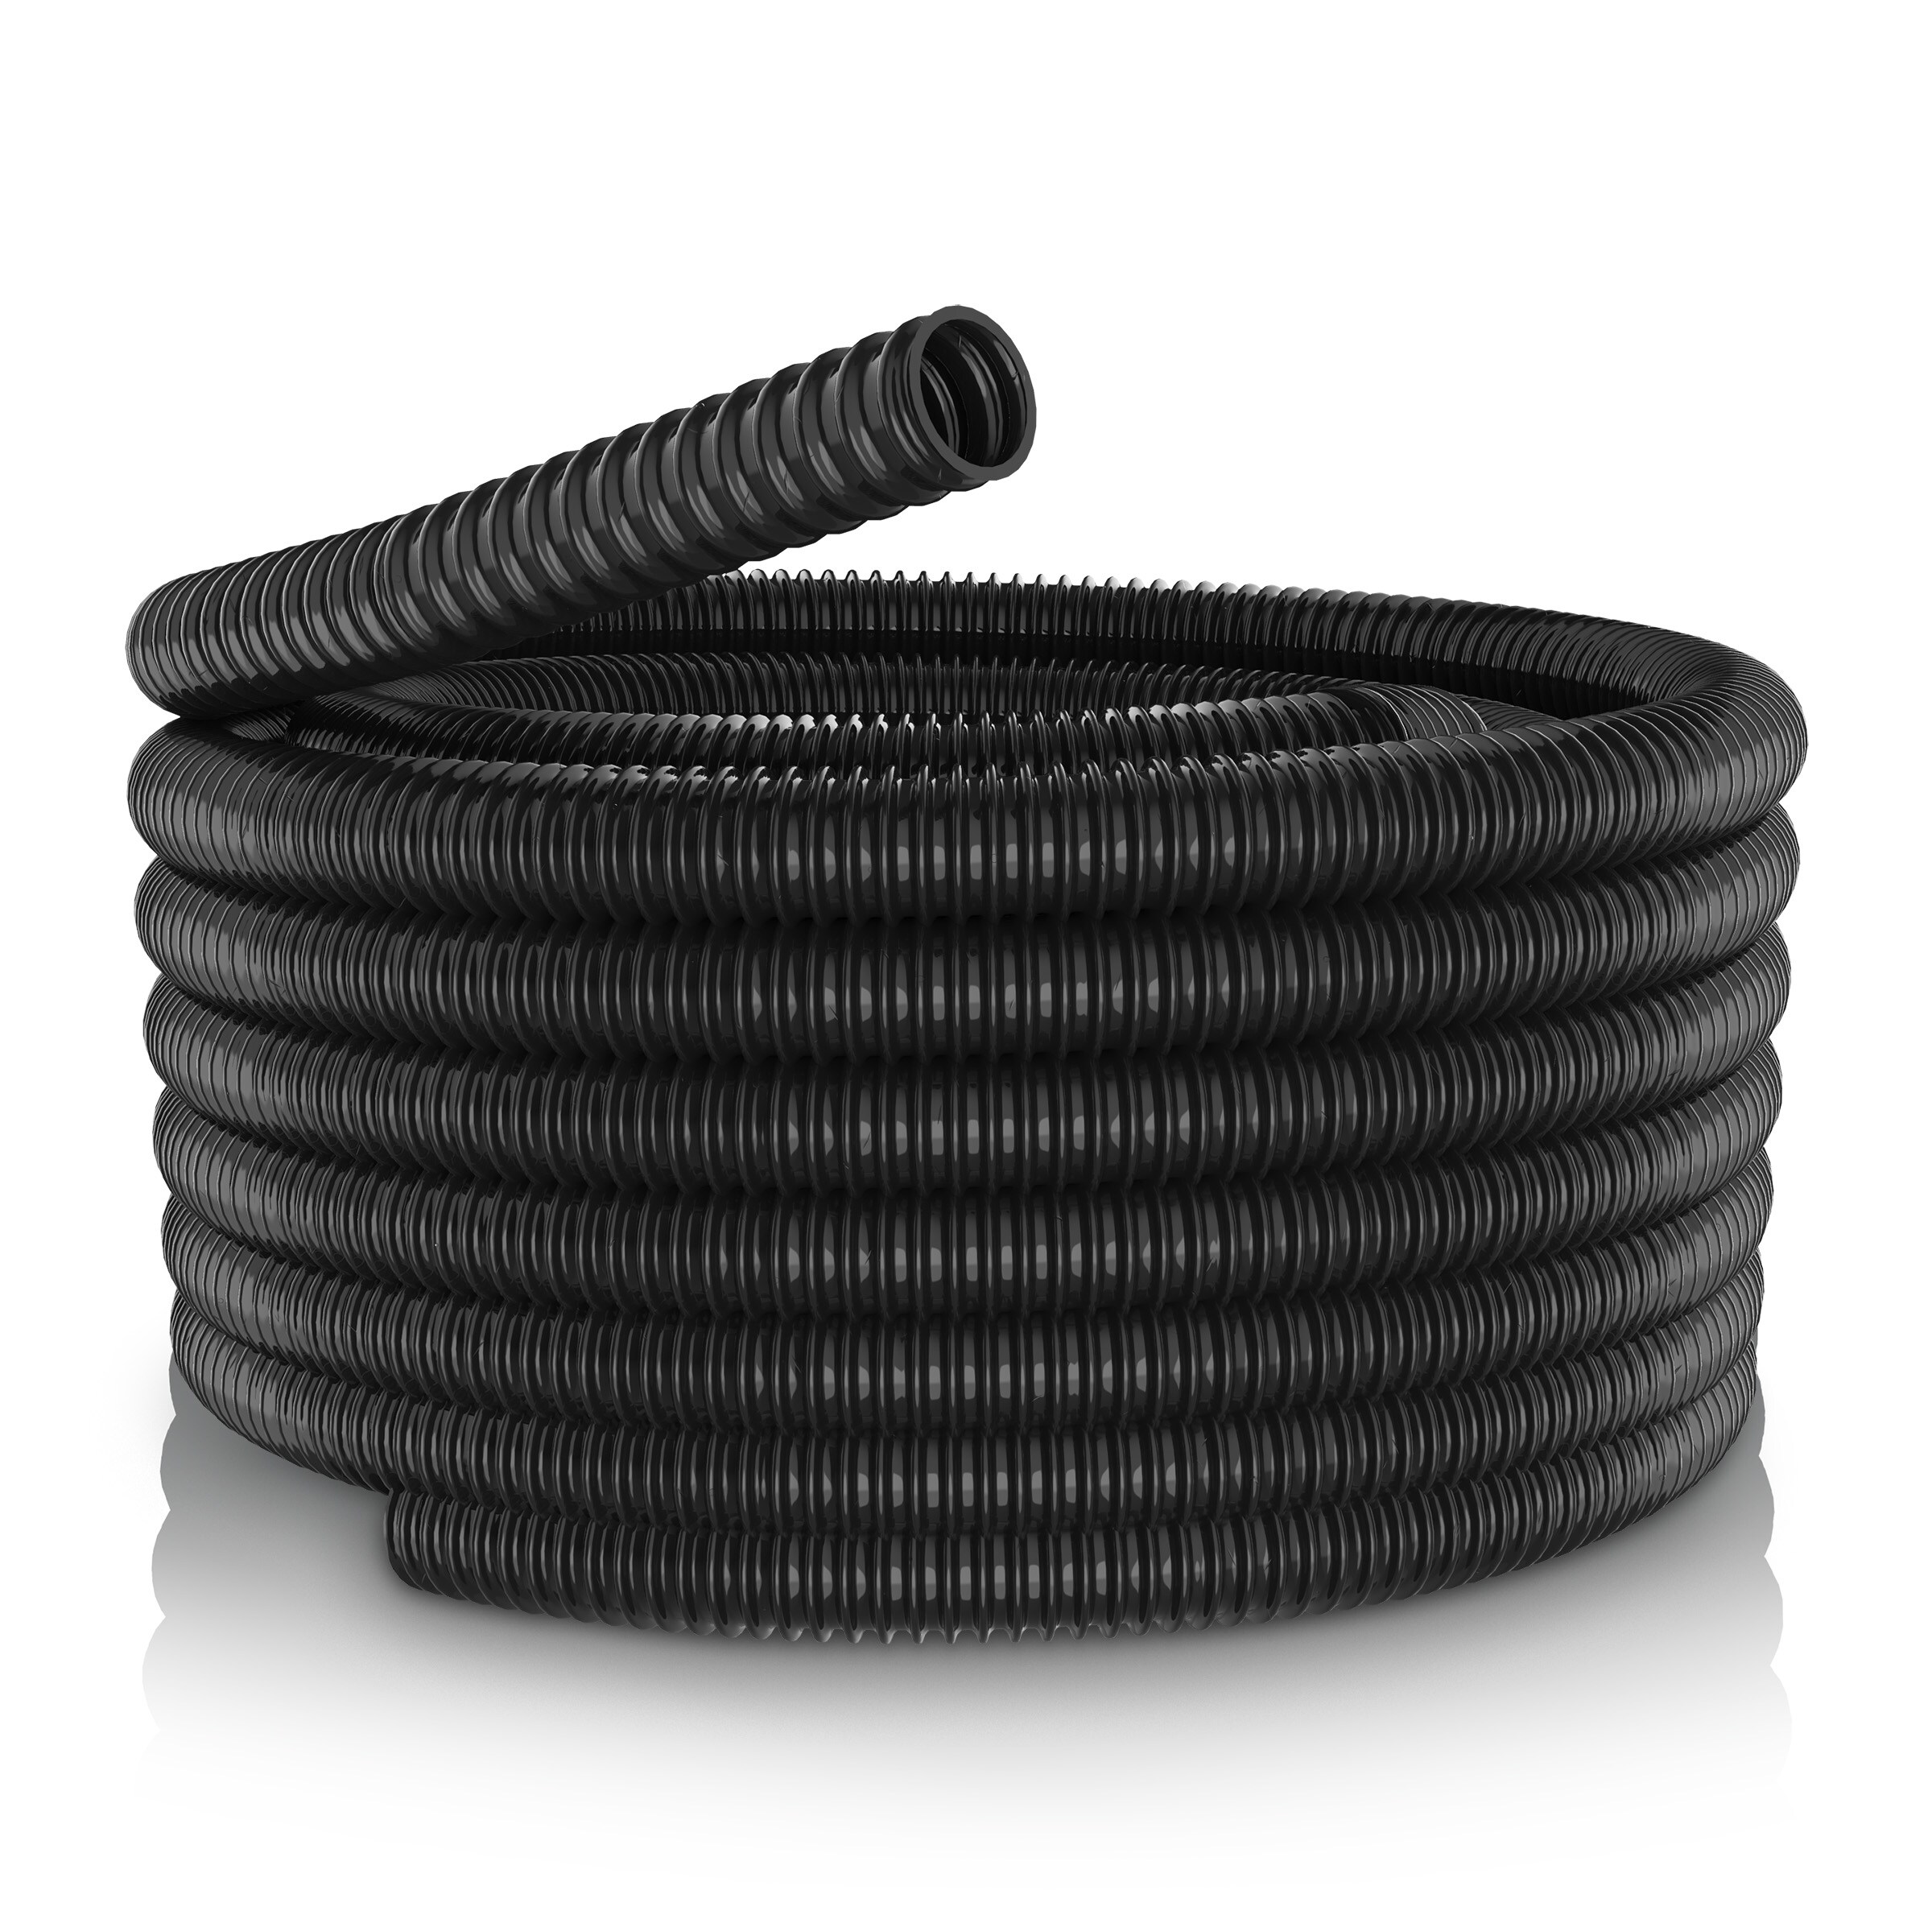 Schedule 40 Hose and Tubing for Koi Ponds Irrigation & Water Gardens Black Flexible PVC Pipe 2 Dia x 10 ft 